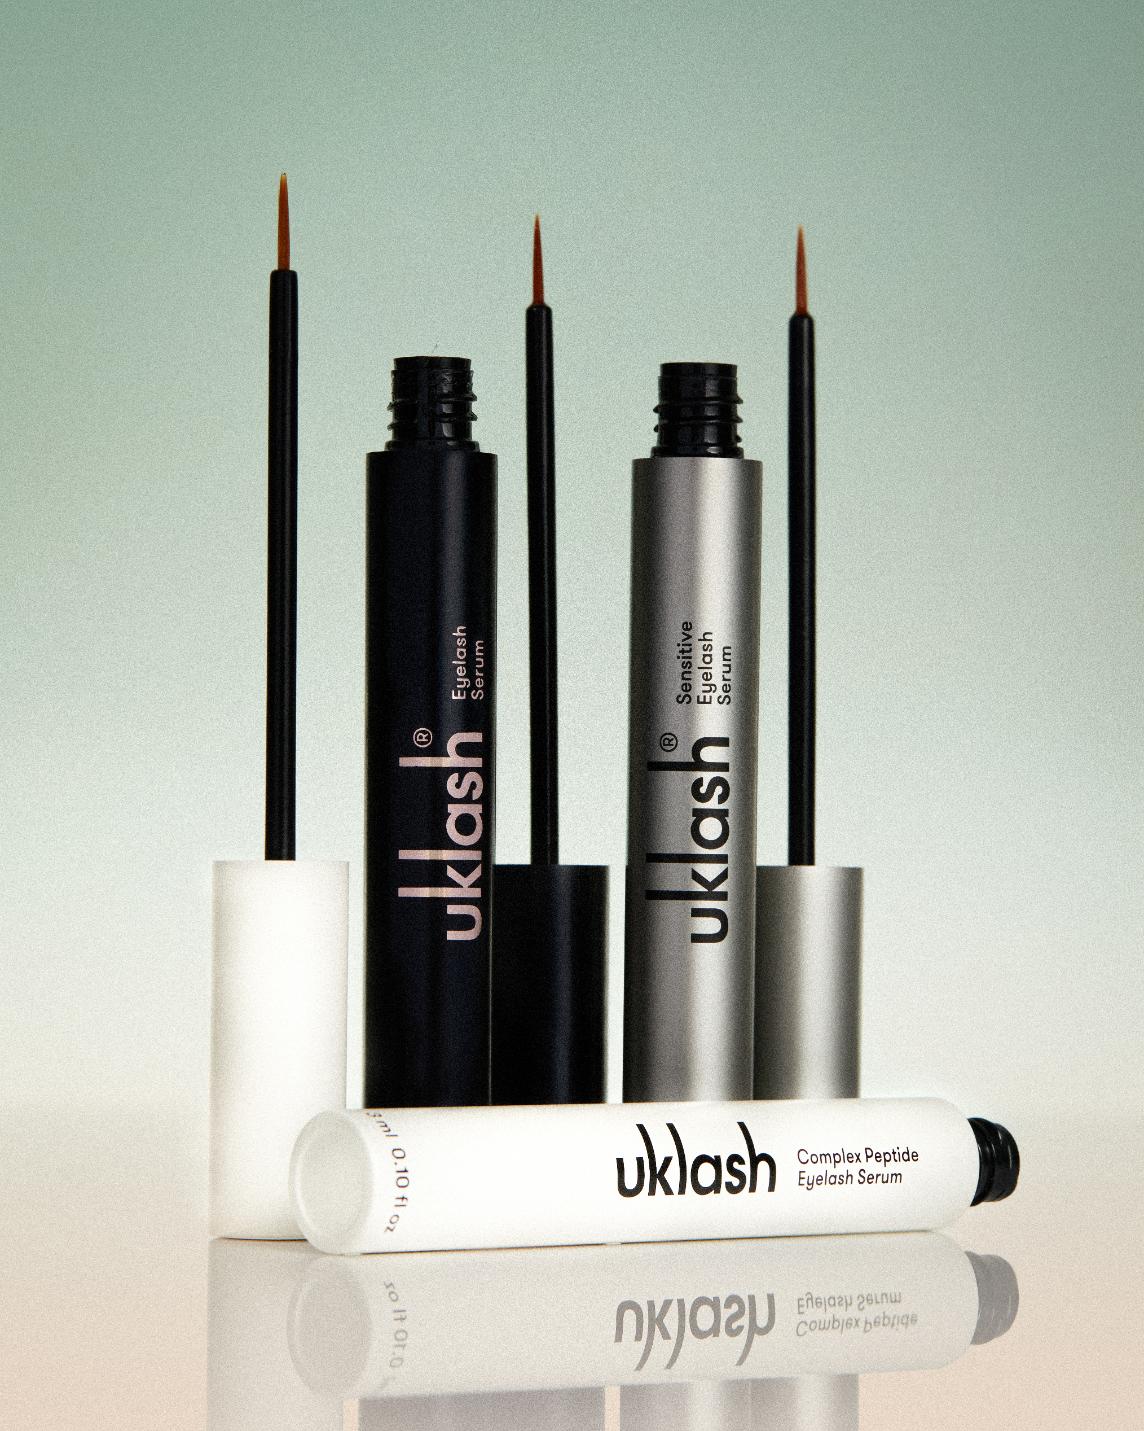 Best Lash Serums For Growth: Which Eyelash Serum Is Right For Me? - UKLASH